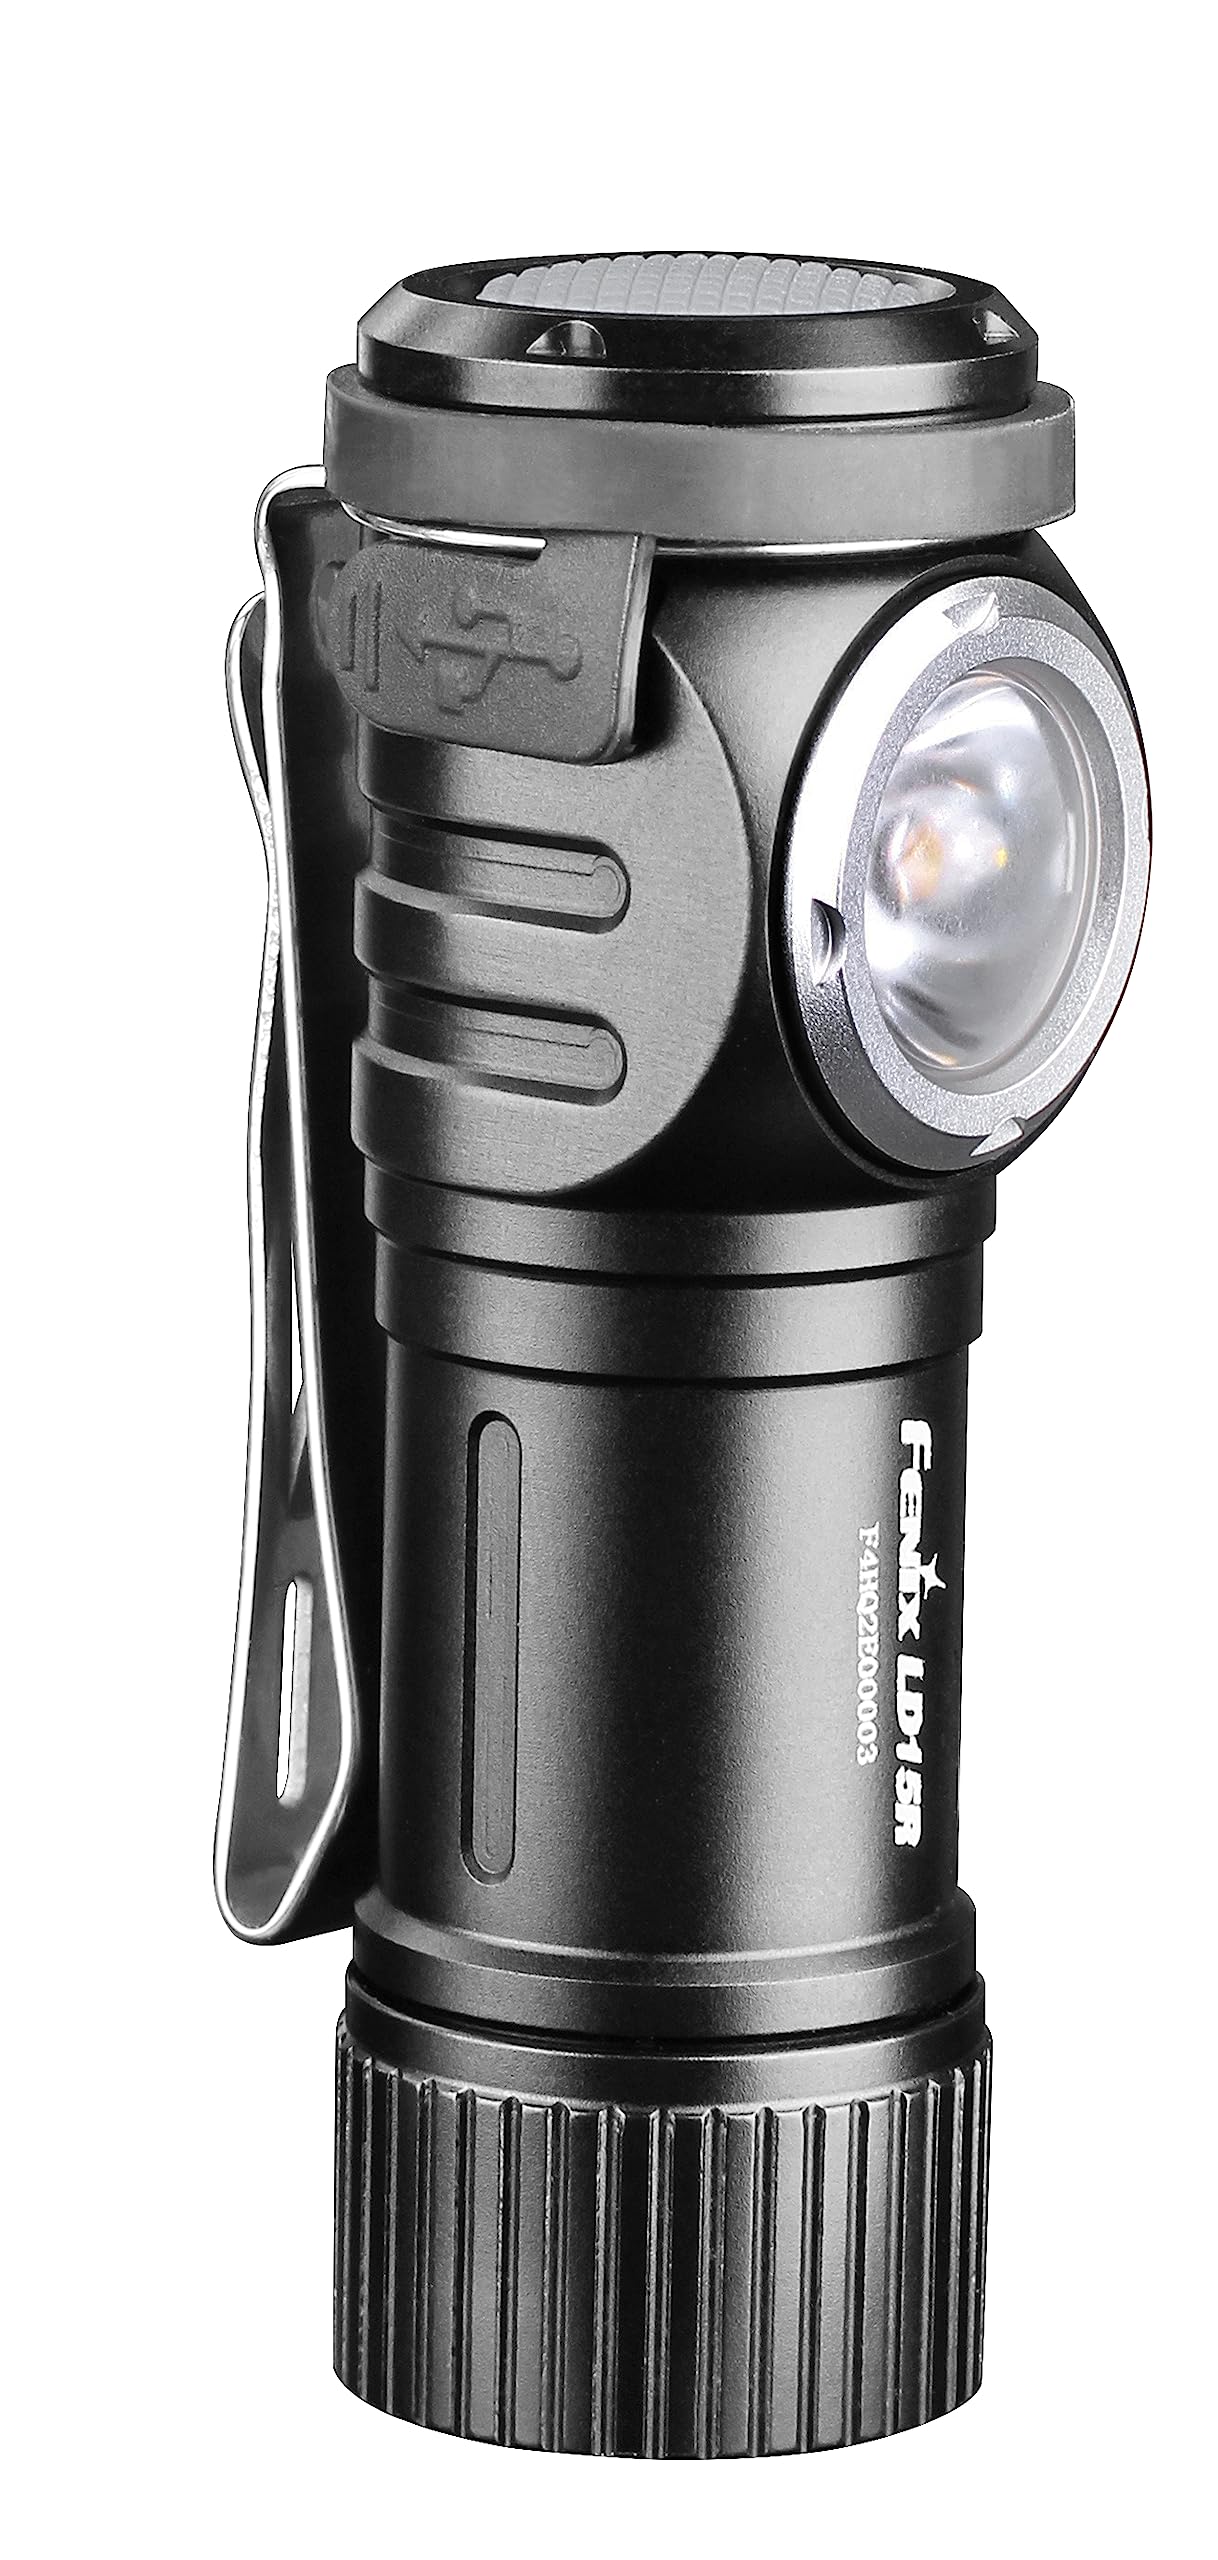 fenix Unisex Adult LD15R Taschenlampe mit Cree XP-G3 White LED, Silver, small